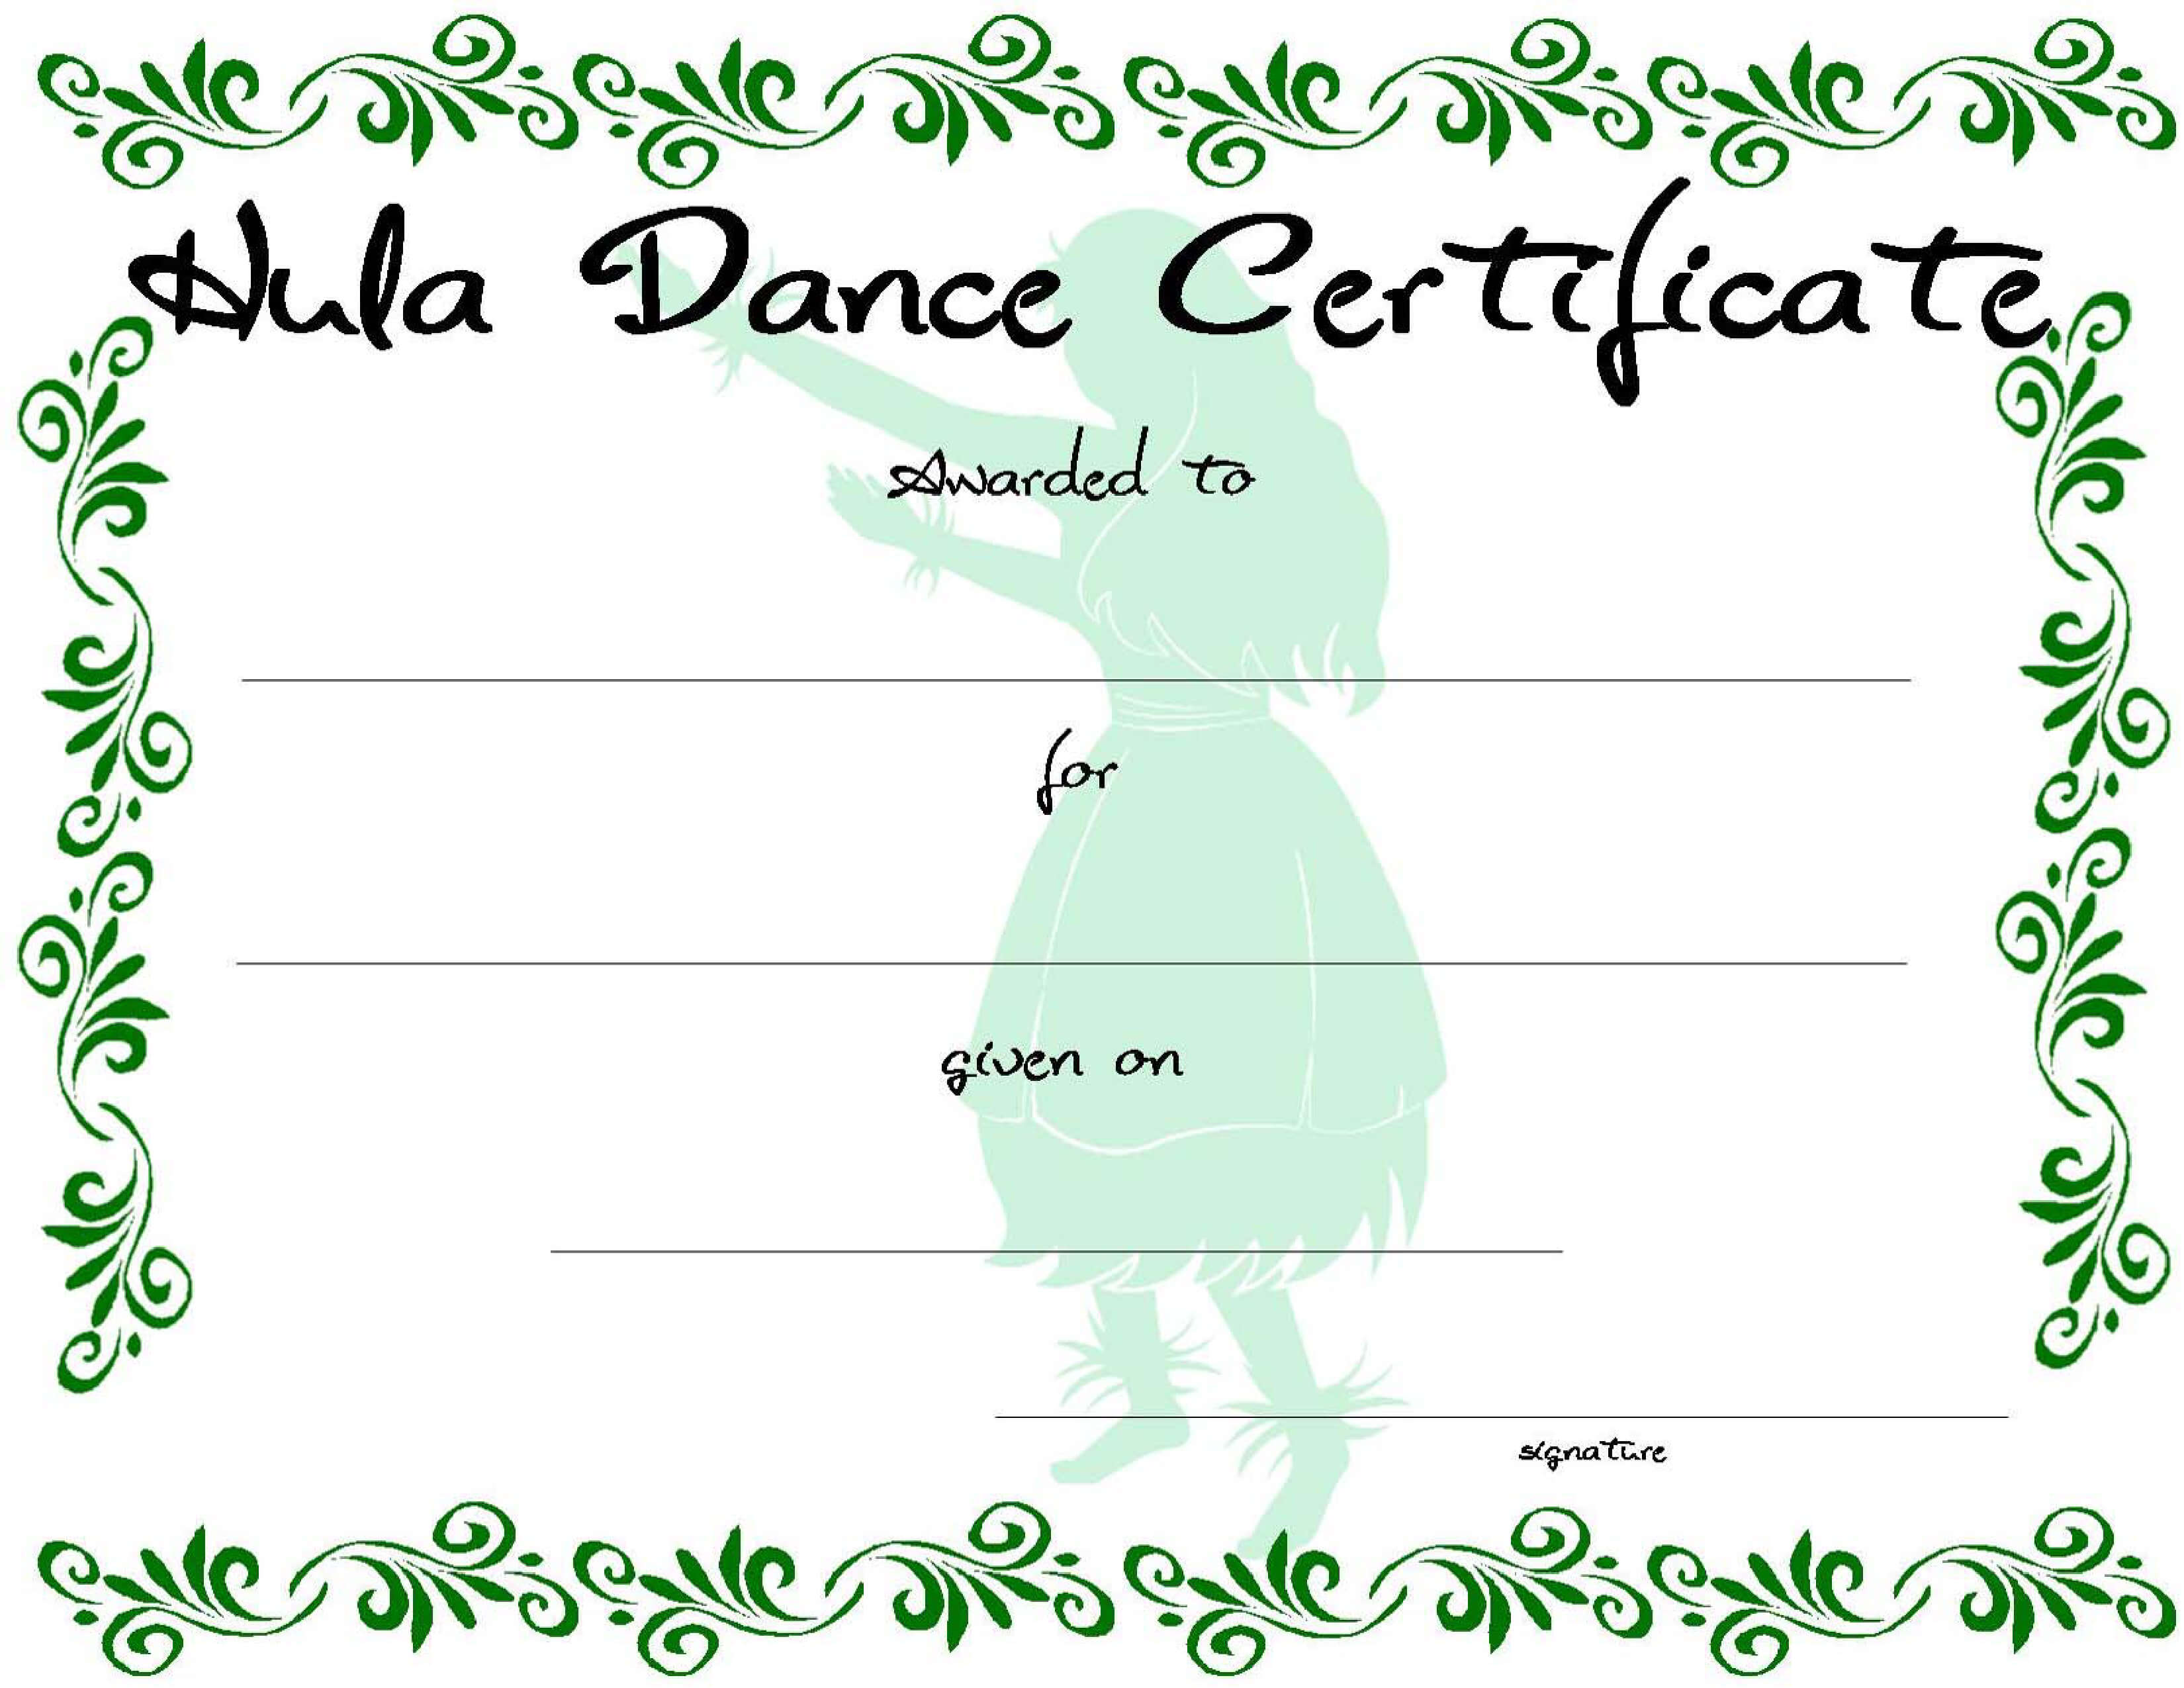 Dance Certificate | Templates At Allbusinesstemplates With Regard To Dance Certificate Template